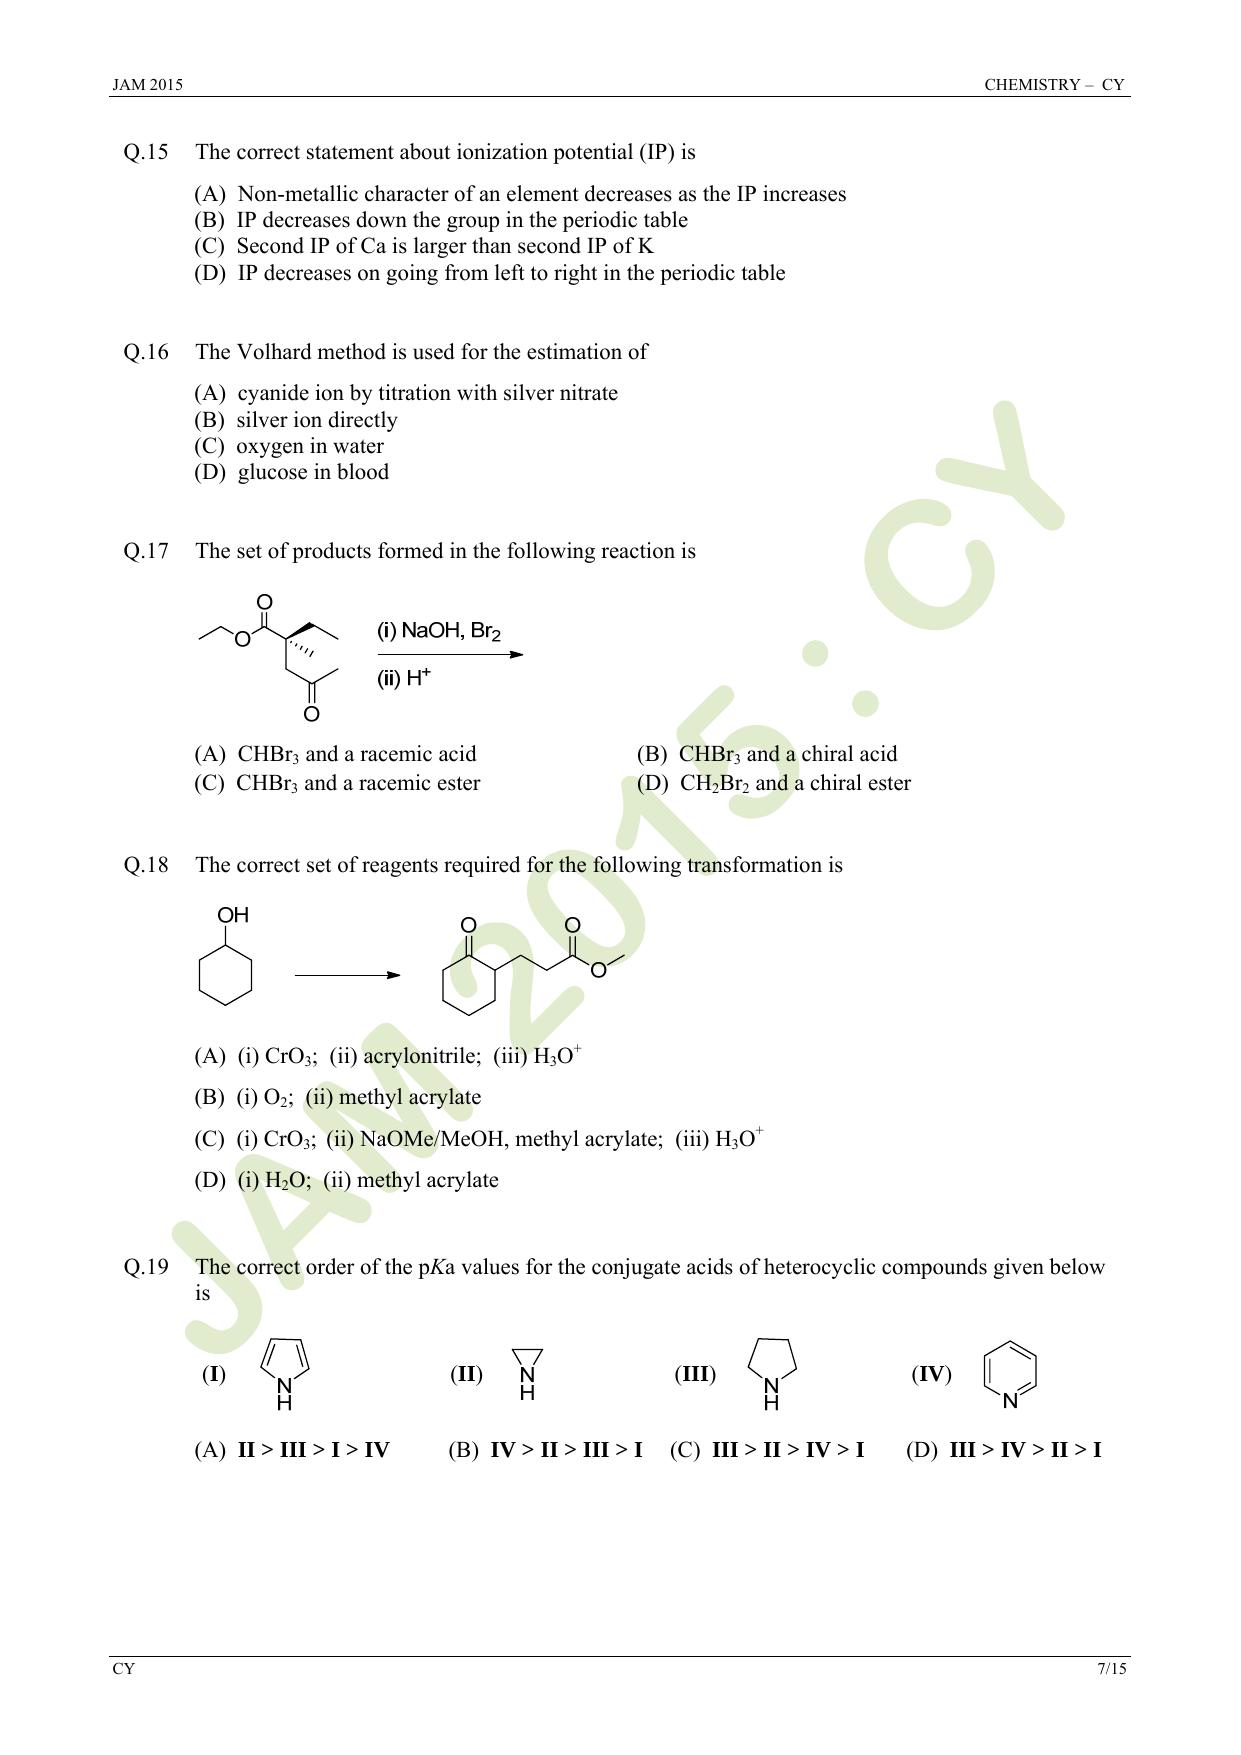 JAM 2015: CY Question Paper - Page 7